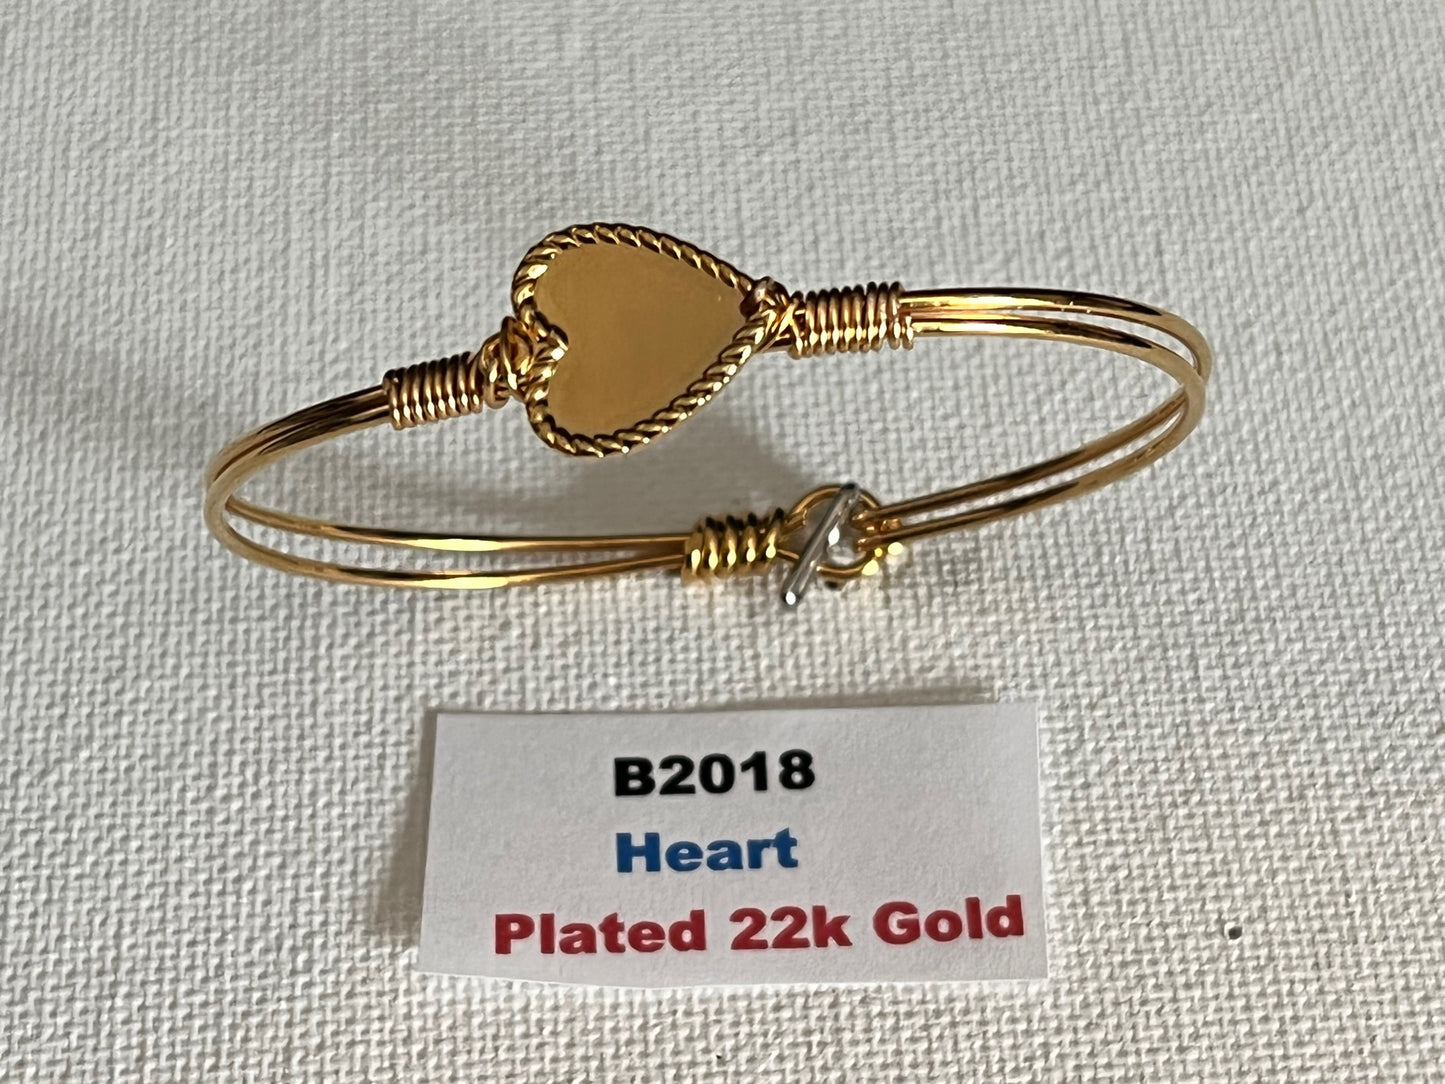 Oval Wired Bracelets with Charm (Various Style)  Styles Include:   22k Gold Plated Heart   22k Gold Plated Butterfly   22k Gold Plated Dog   Heart Platinum-Plated   Butterfly Platinum-Plated   Dog Platinum-Plated   22k Gold Plated Cowgirl Hat   22k Gold Plated Cat   Cowgirl Hat Platinum-Plated   Cat Platinum-Plated   